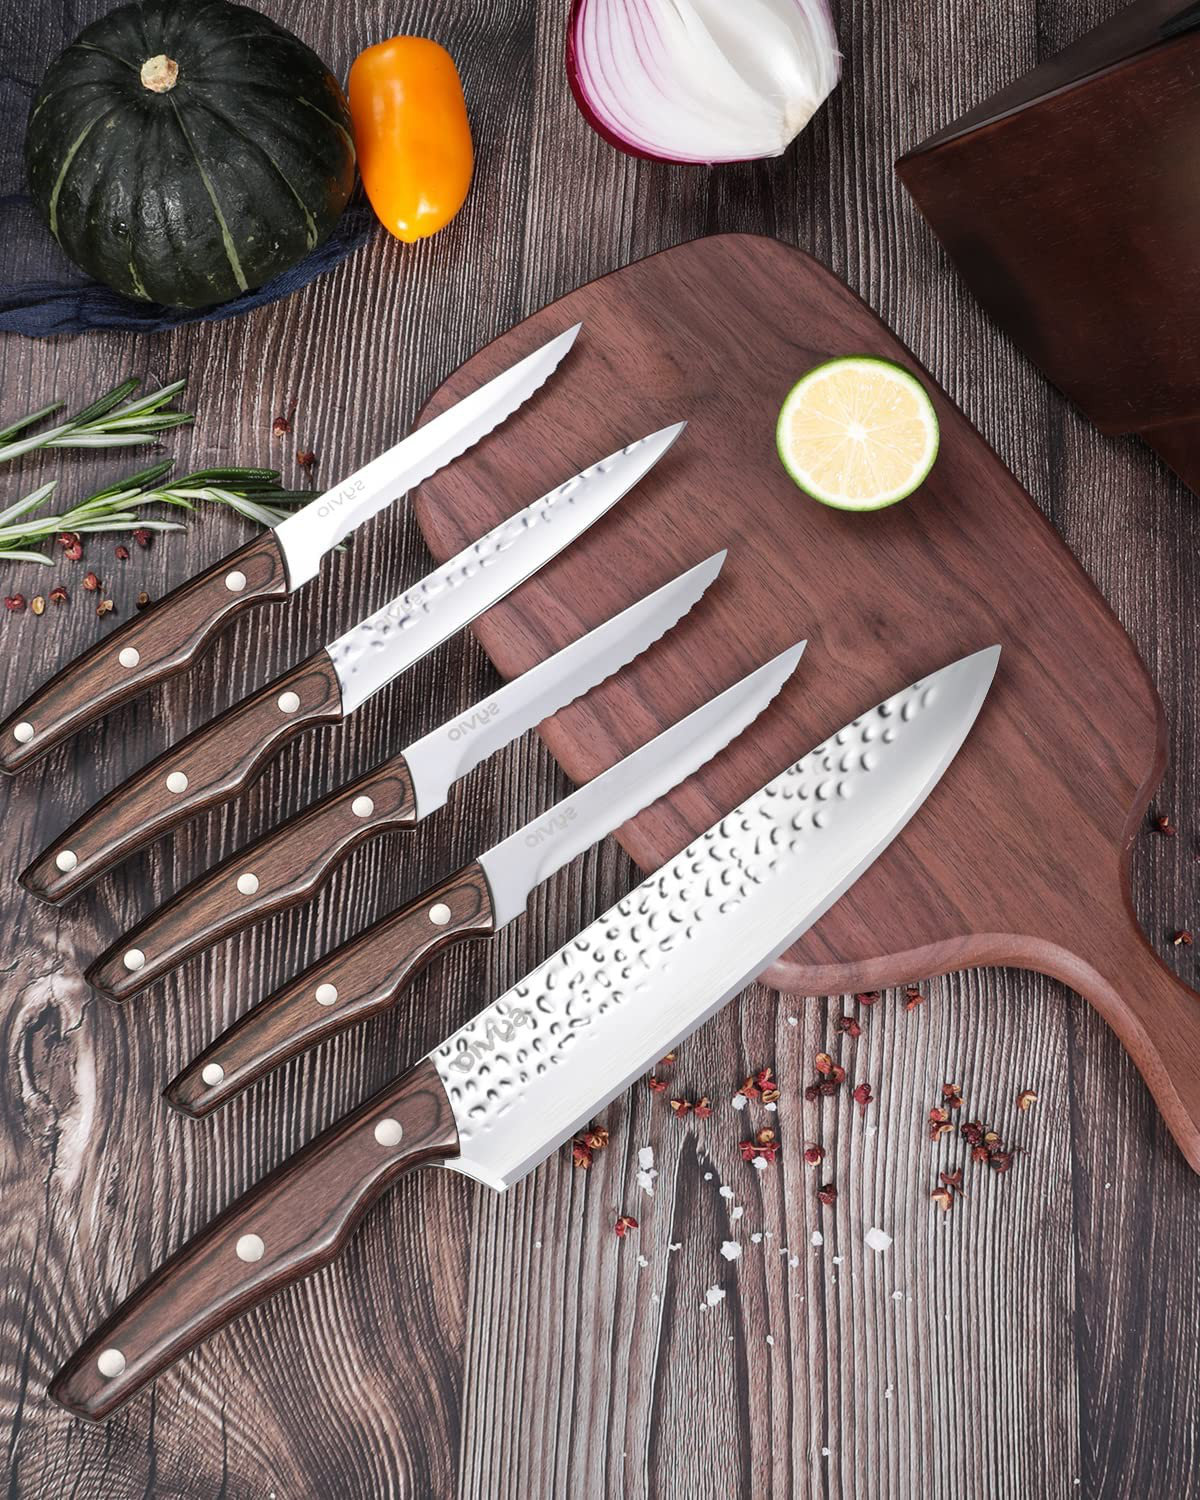 Stainless Steel Kitchen Knives Set 6PCS Cooking Tools Forged Knives  Scissors Peeler Chef Slicer Paring Knife Sharp Cleaver Knife